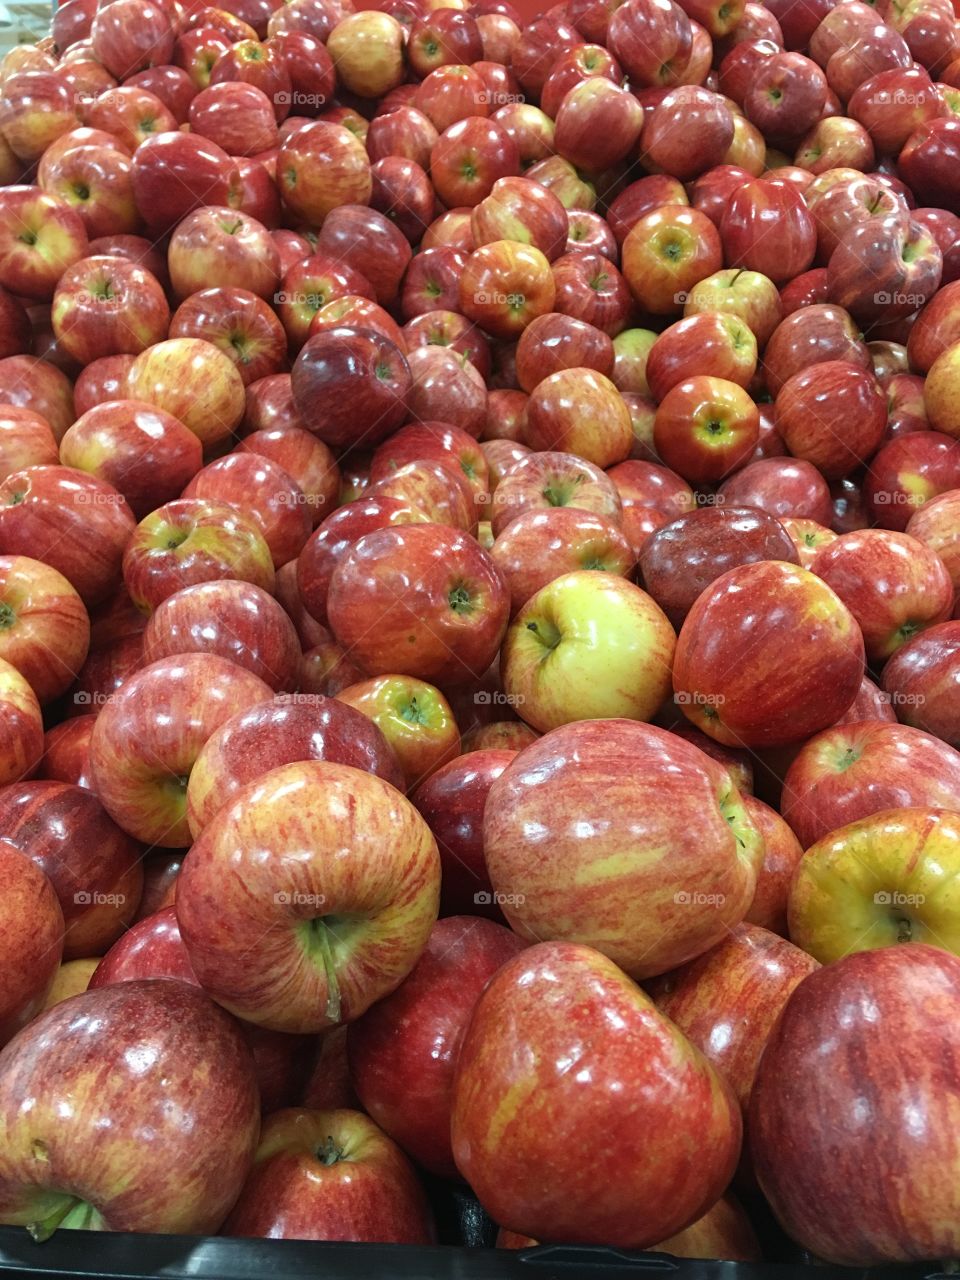 Bunch of red apples on display 